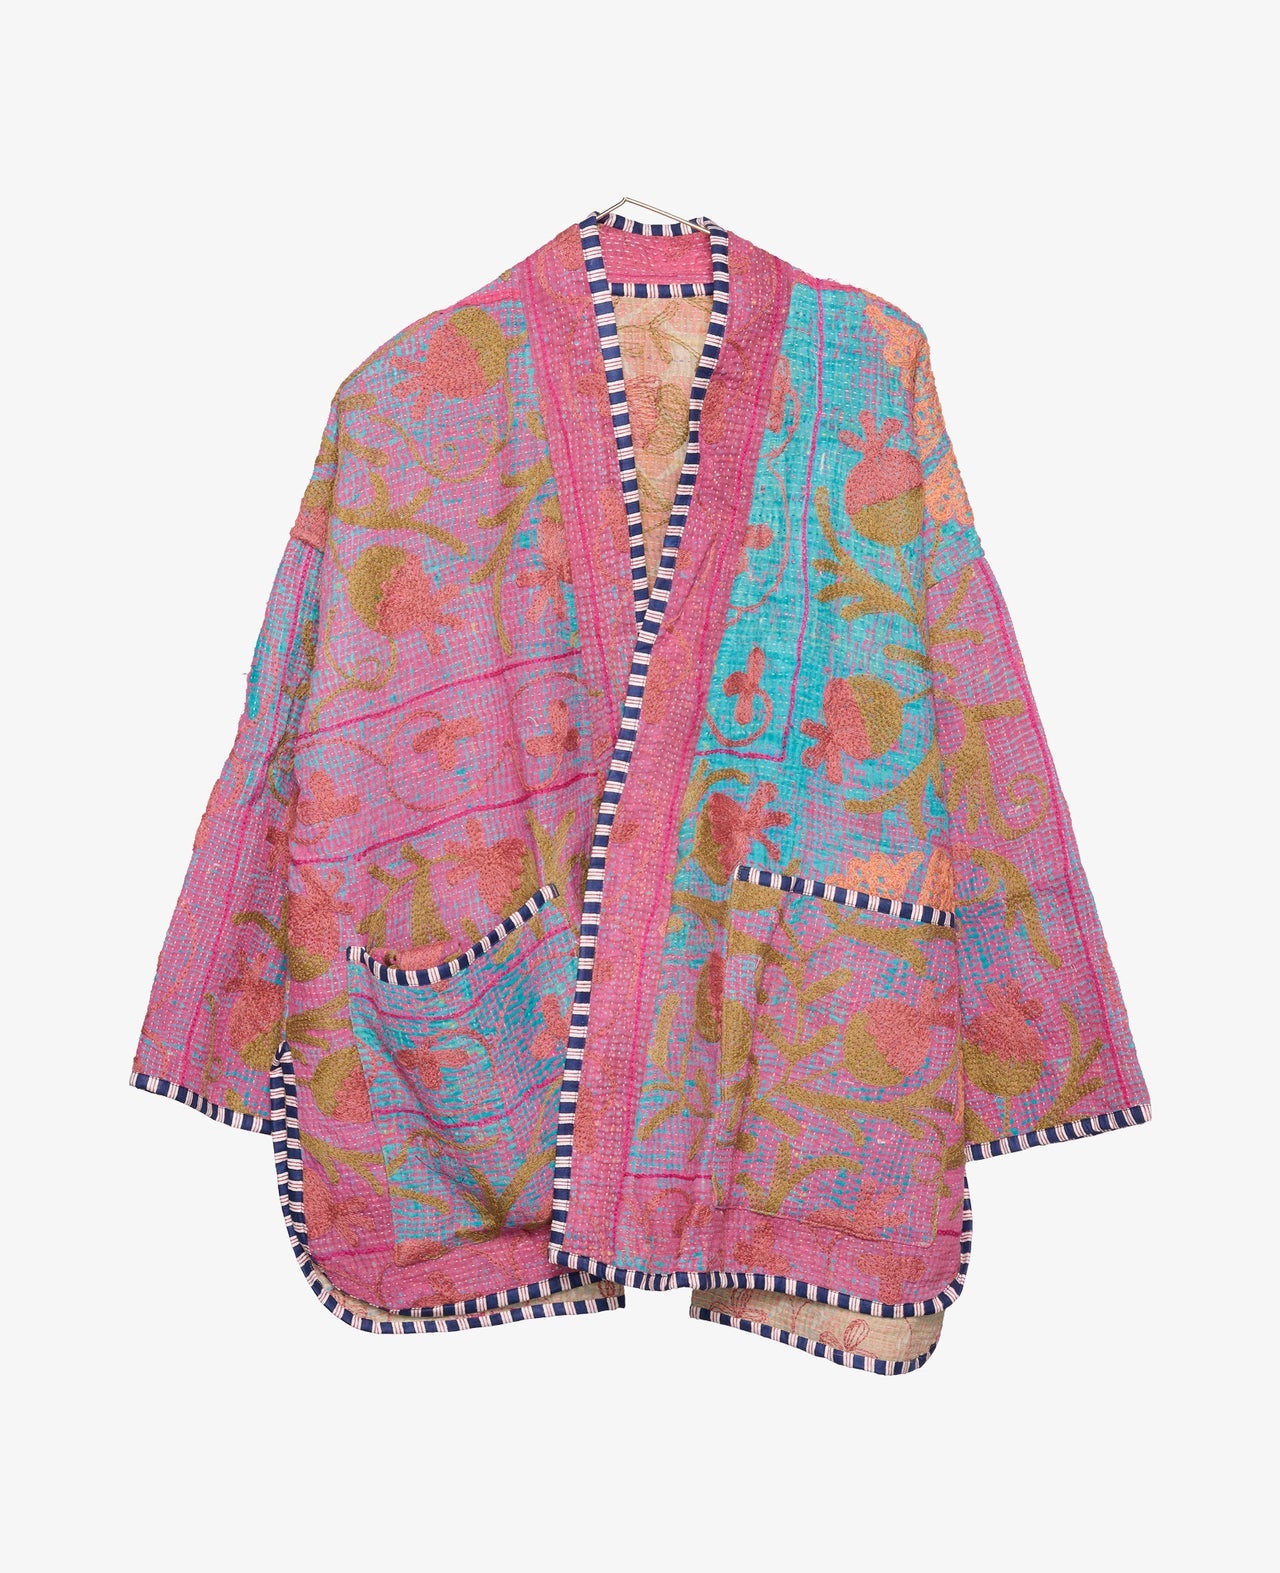 Vibrant, pink and light blue, one-of-a-kind Hedvig Kantha Suzani Jacket by Danish brand Sissel Edelbo